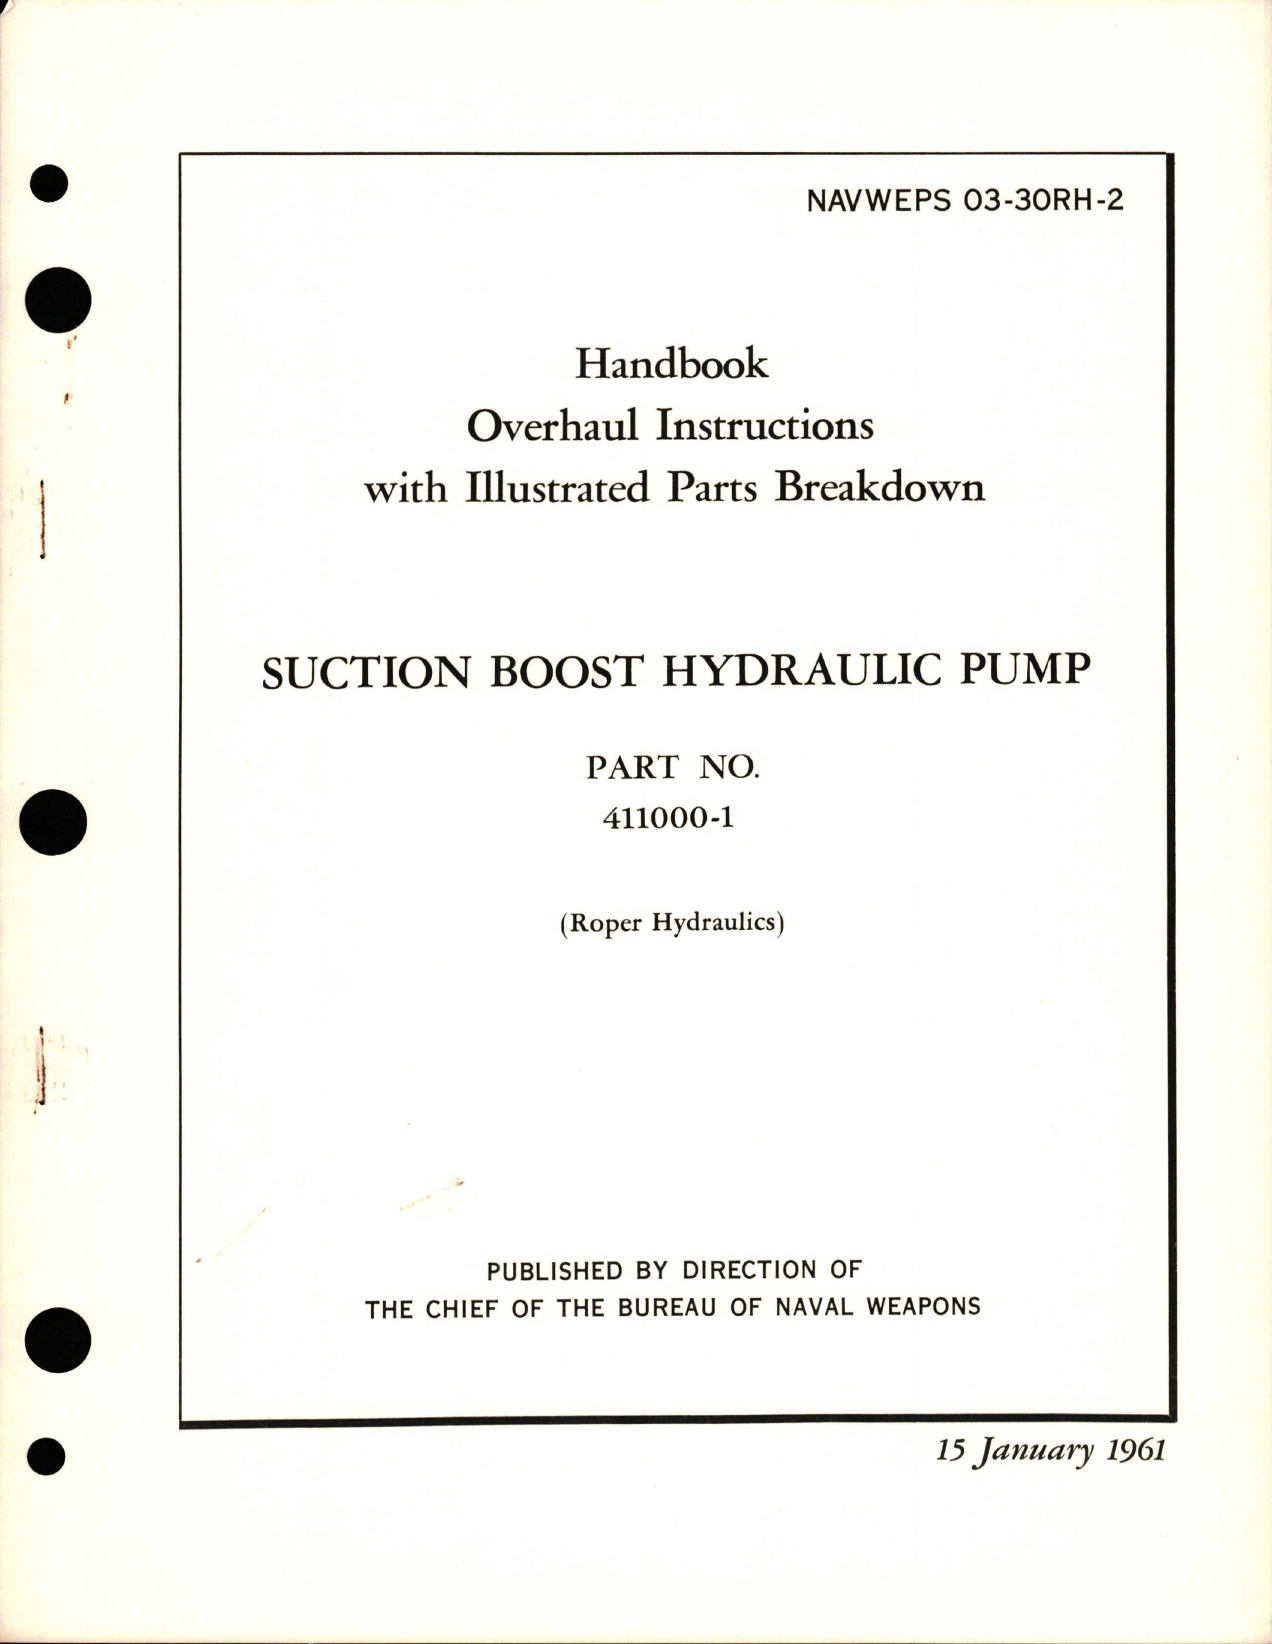 Sample page 1 from AirCorps Library document: Overhaul Instructions with Illustrated Parts Breakdown for Suction Boost Hydraulic Pump - Part 411000-1